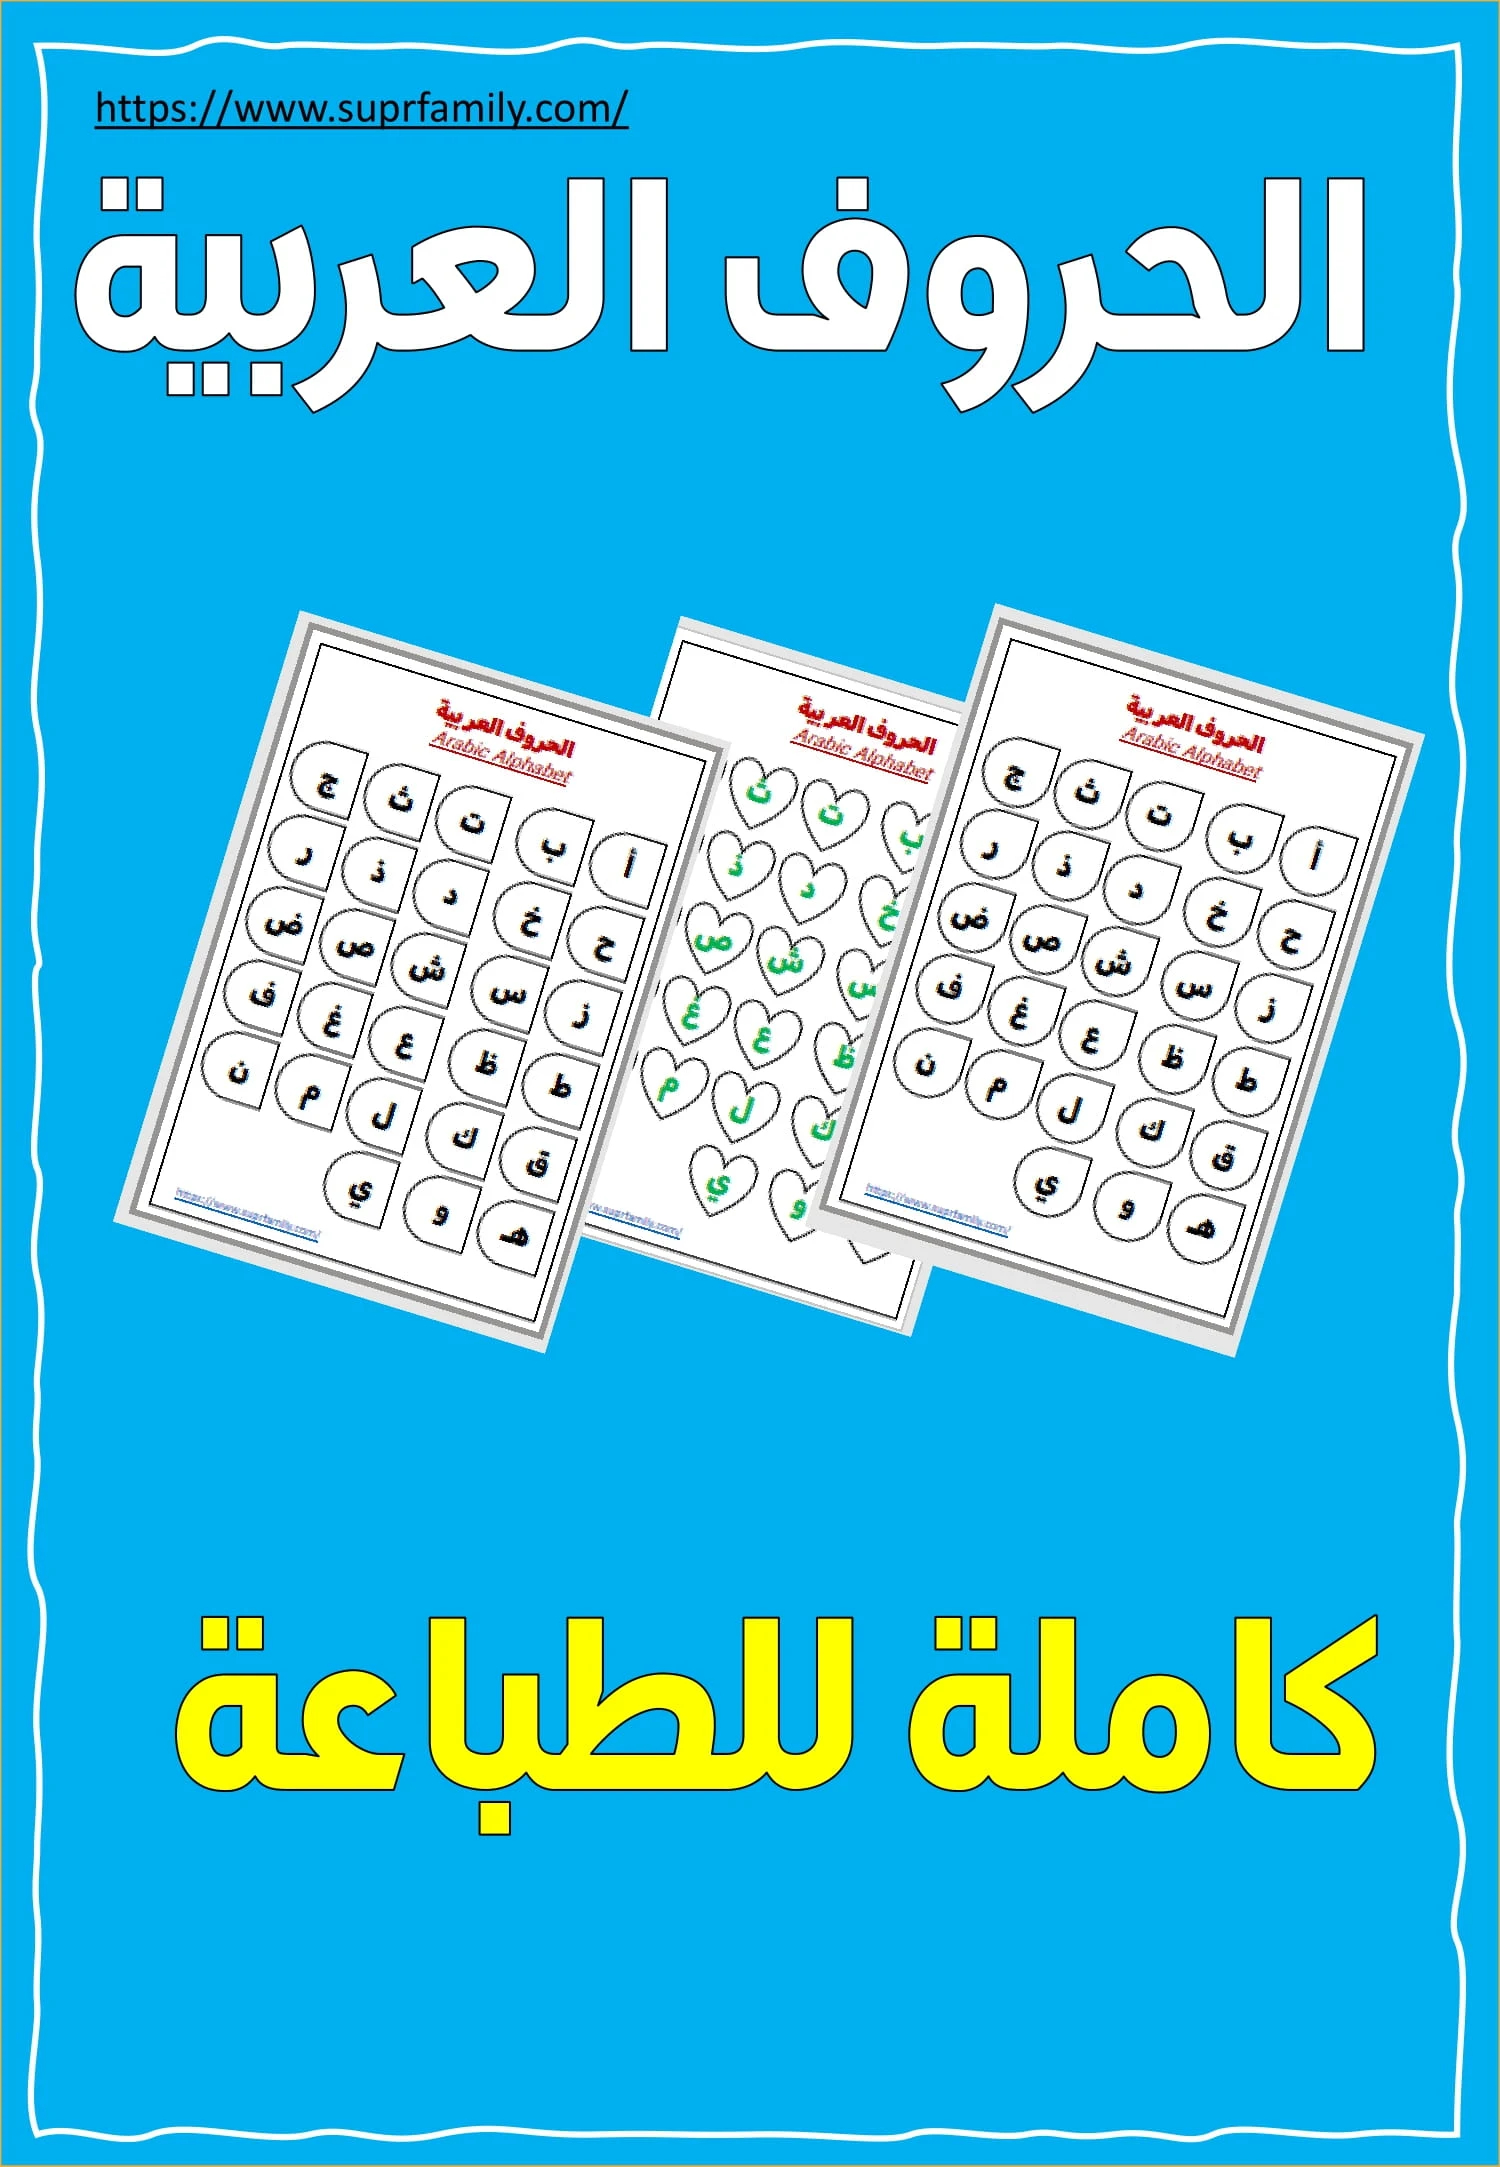 The Arabic Alphabet PDF- Free Download for Printing - Direct Link